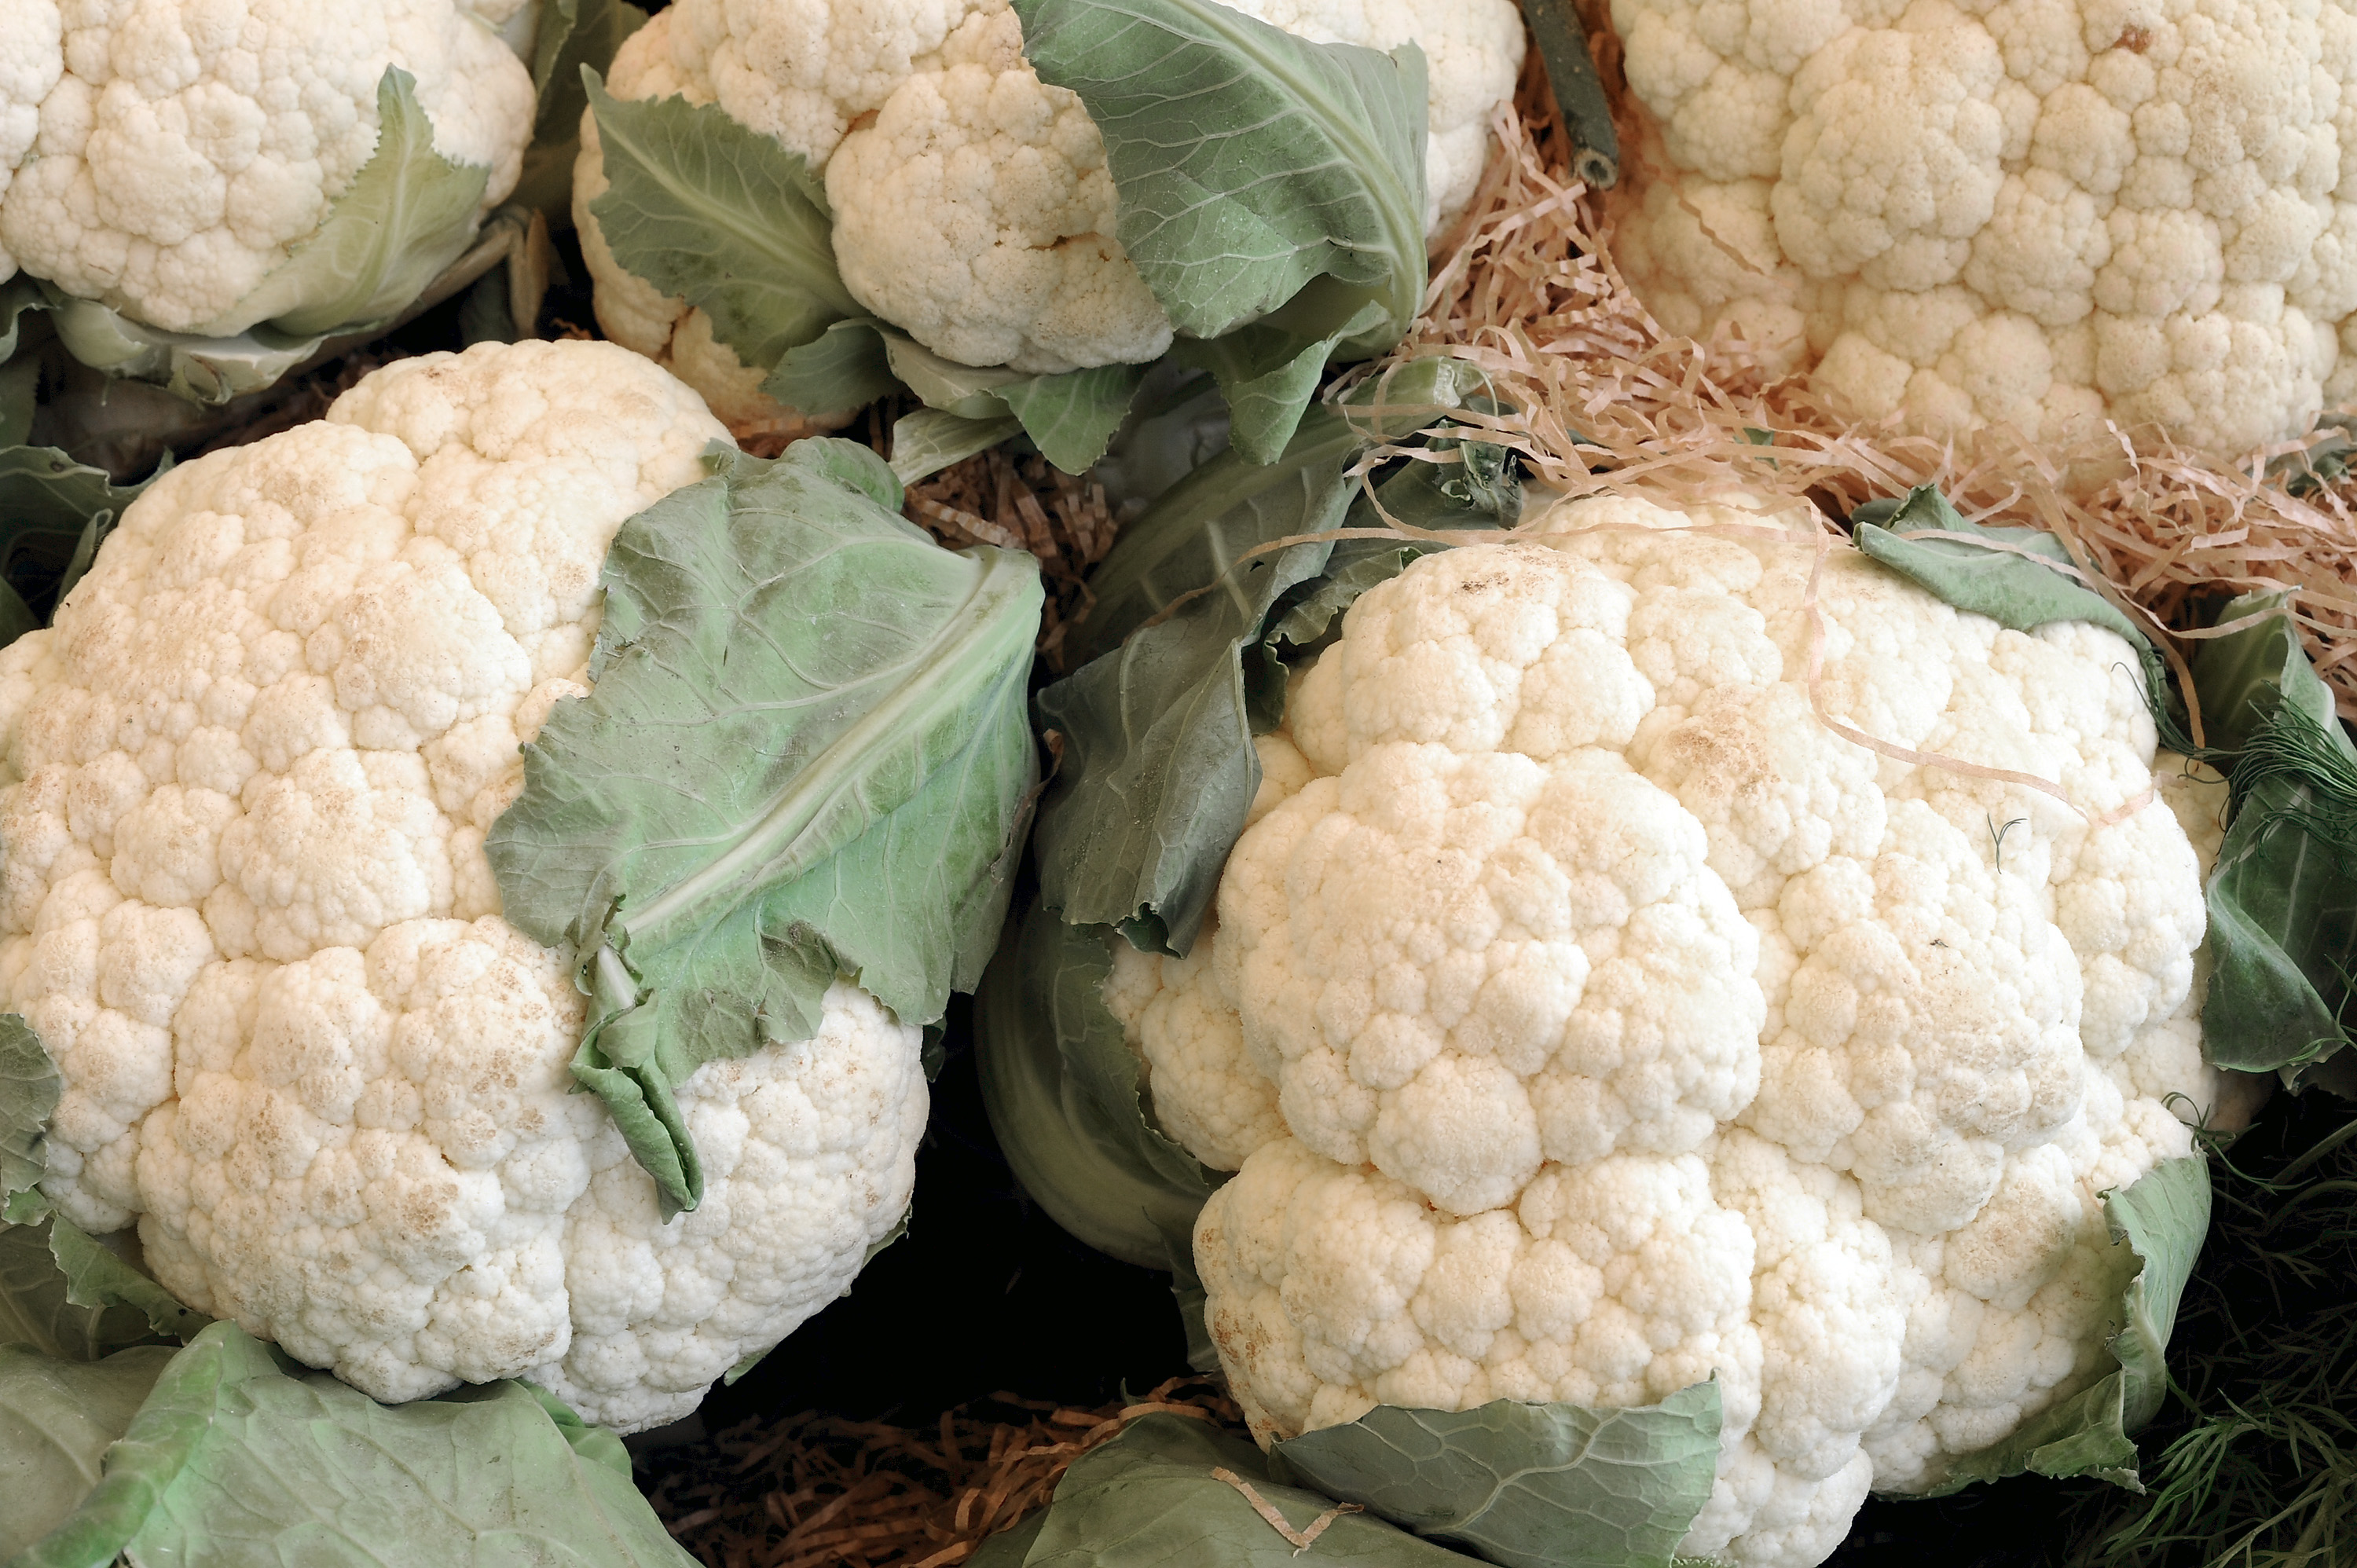 Some white cauliflower are displayed during the Expo 2015 at Fiera Milano Rho on May 29, 2015 in Milan, Italy. (Pier Marco Tacca—Getty Images)